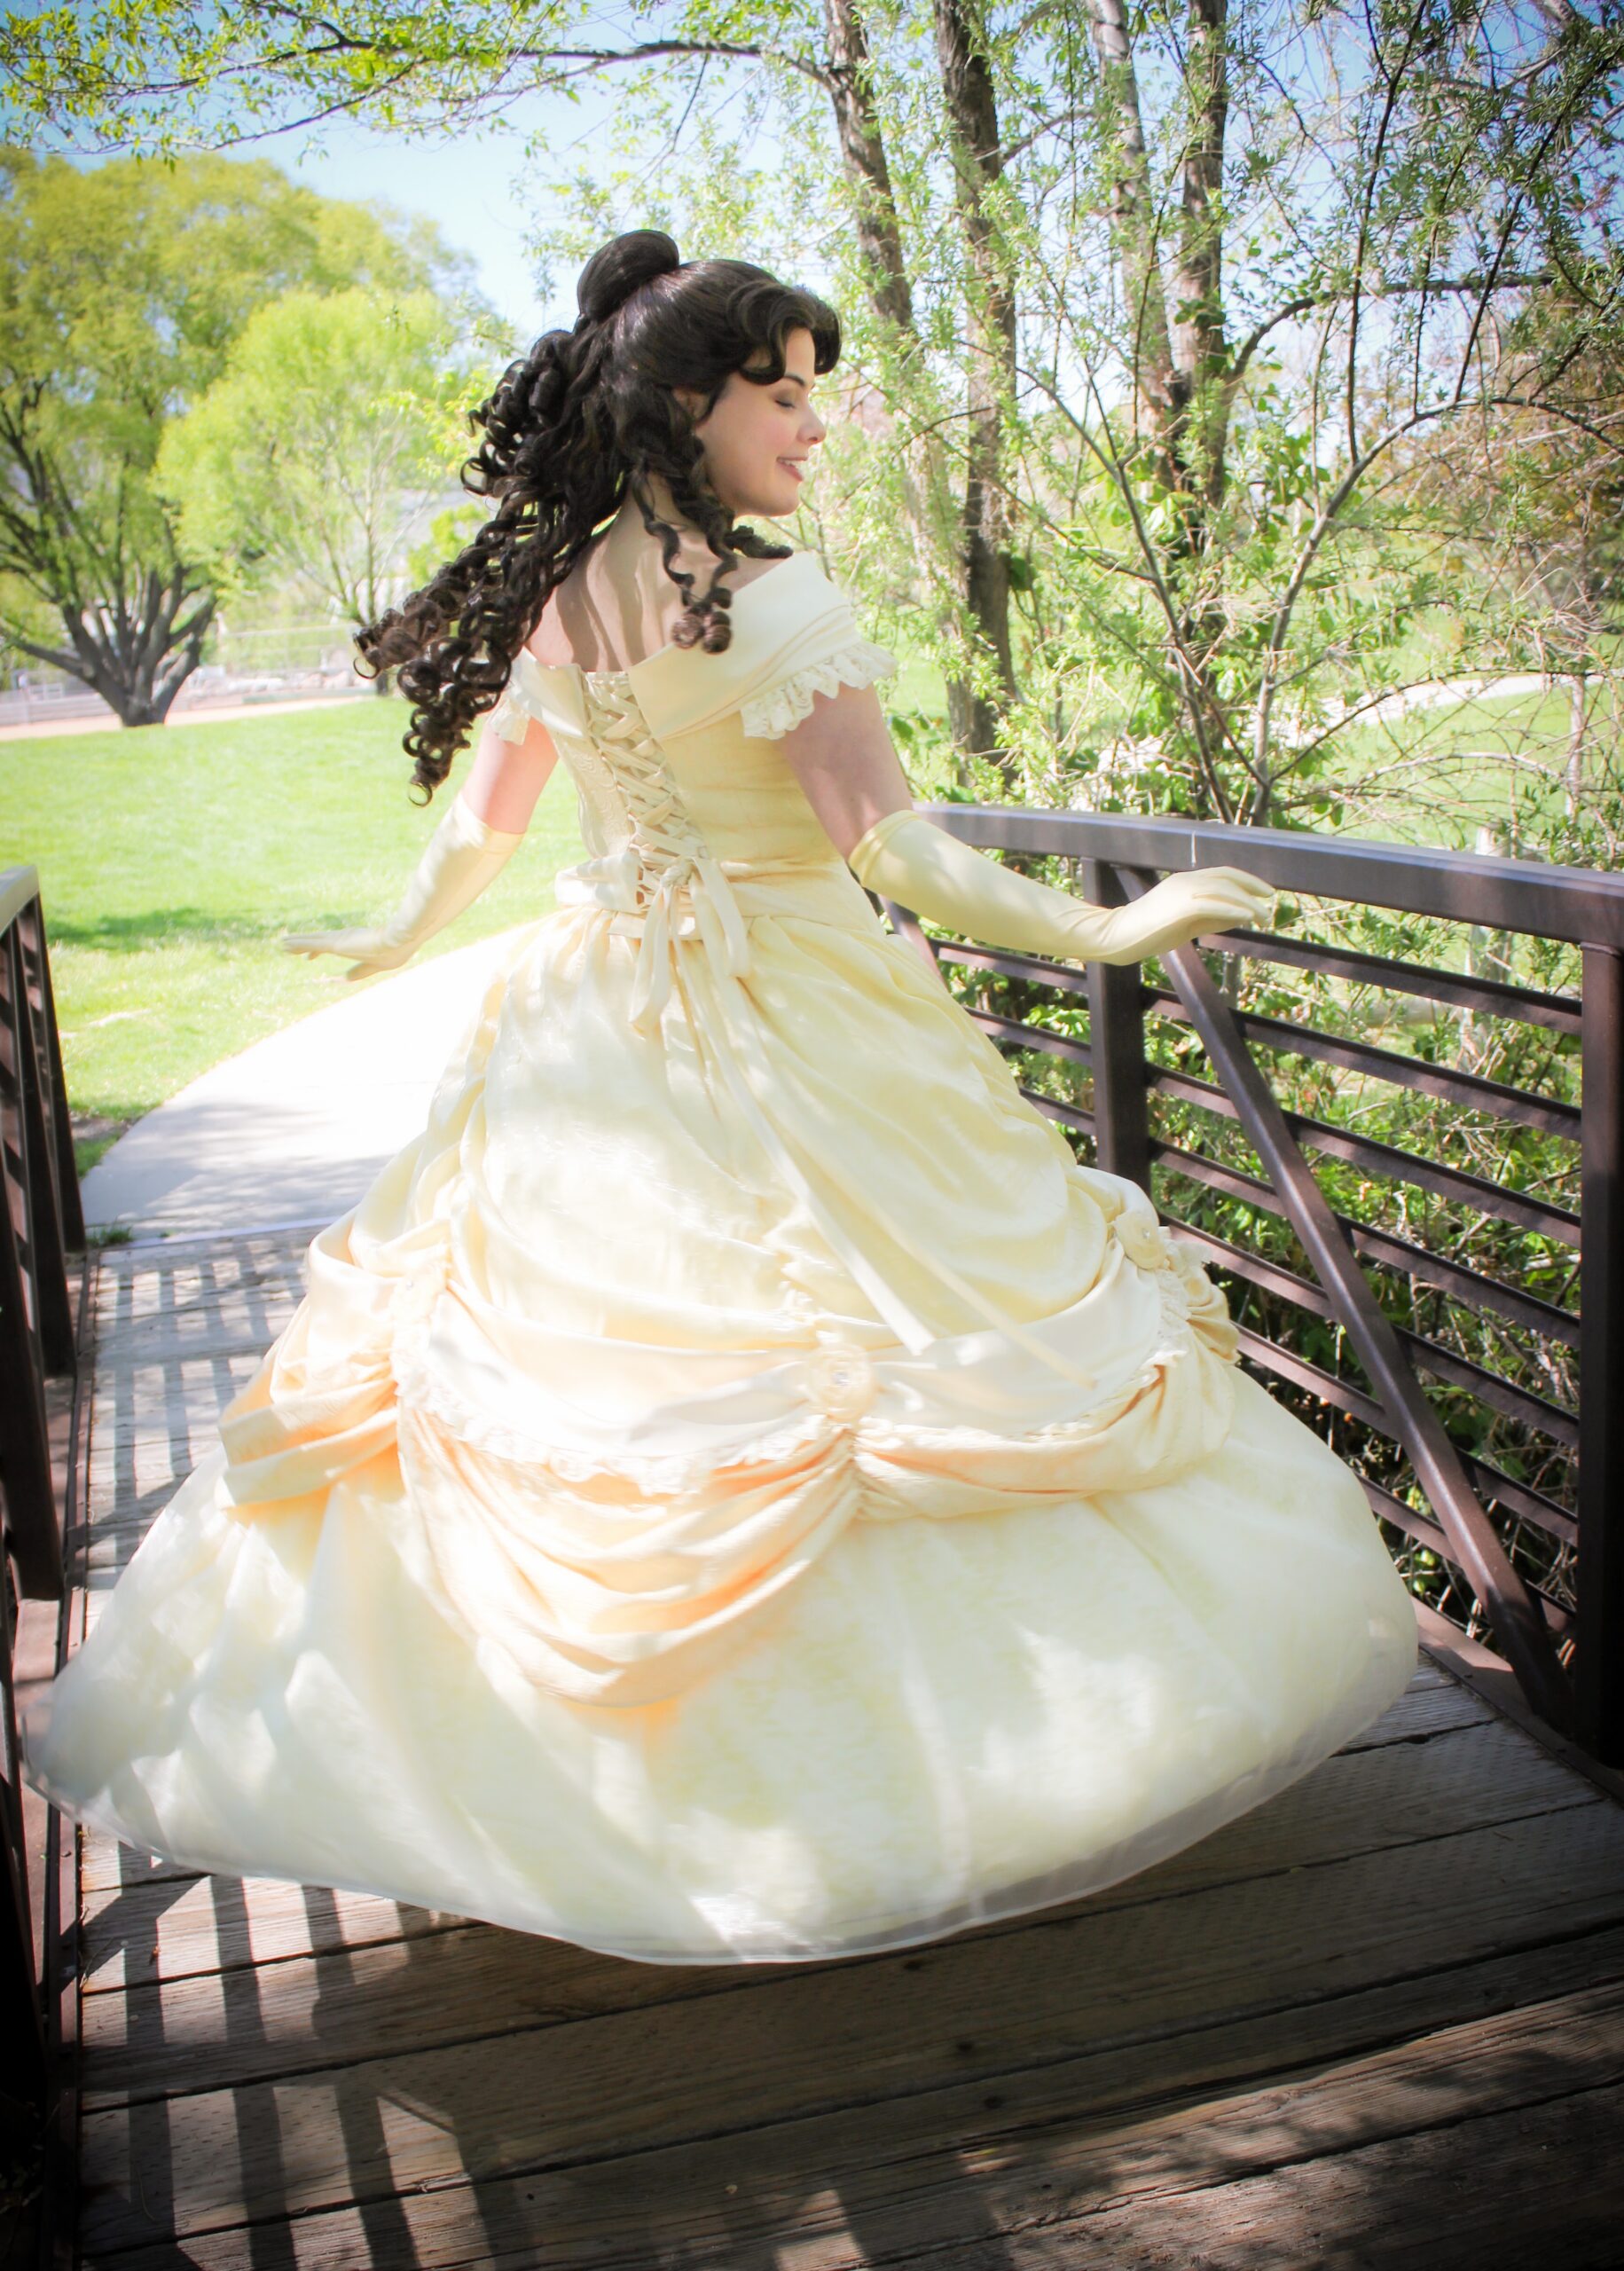 Belle - Character Booking